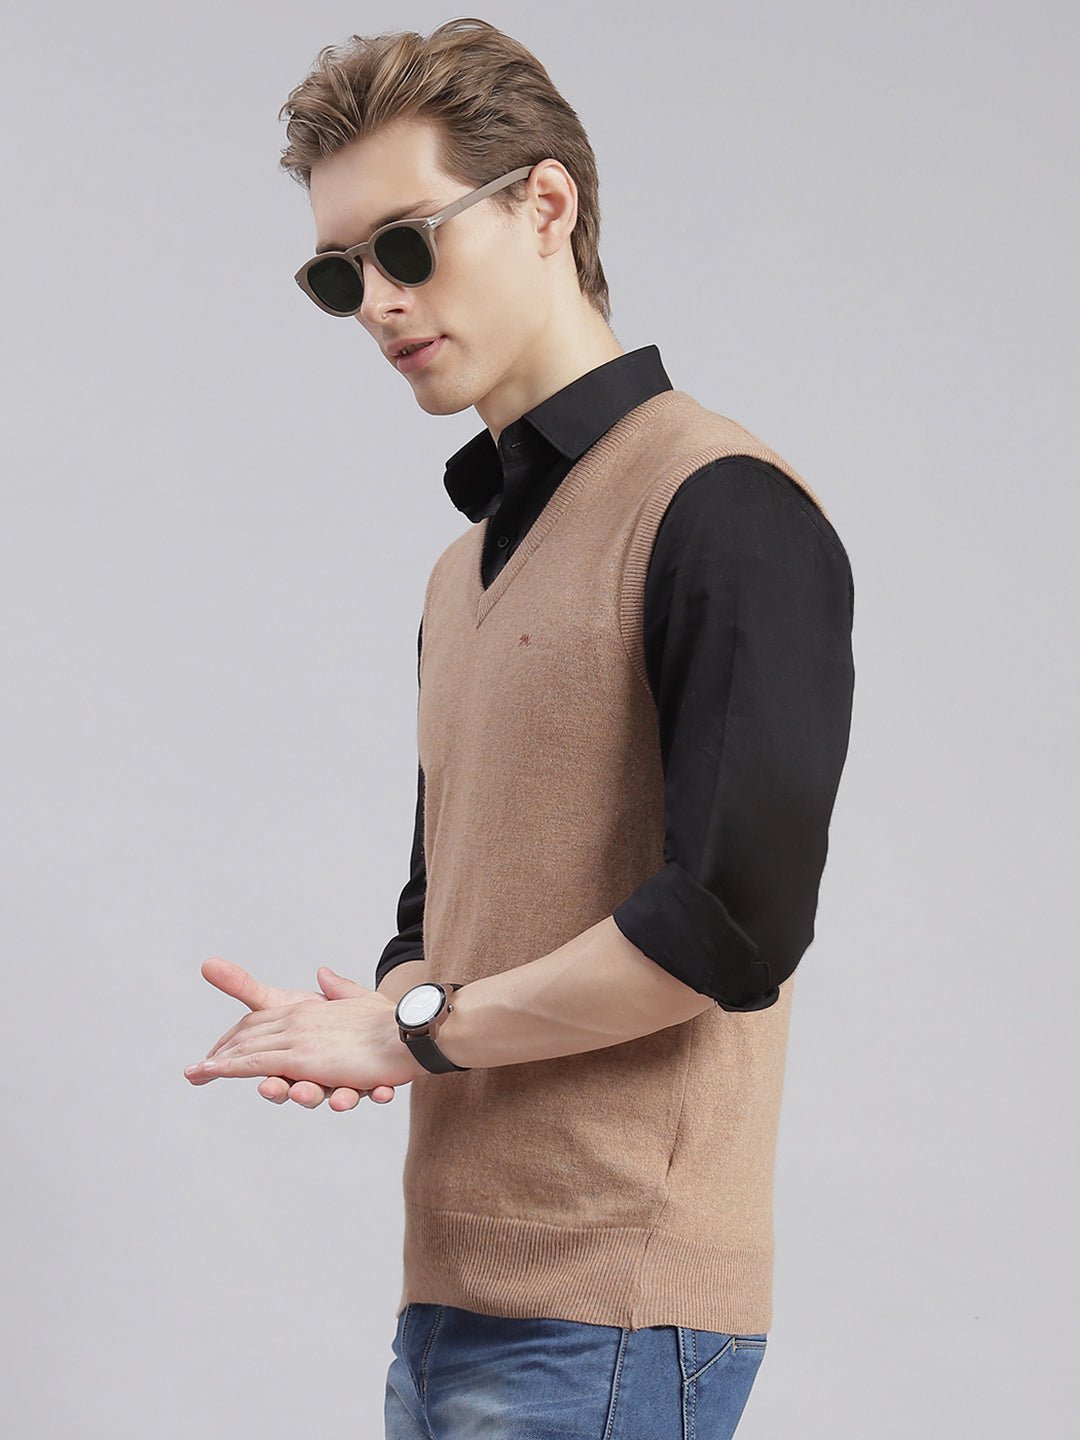 Men Brown Solid V Neck Sleeveless Sweaters/Pullovers